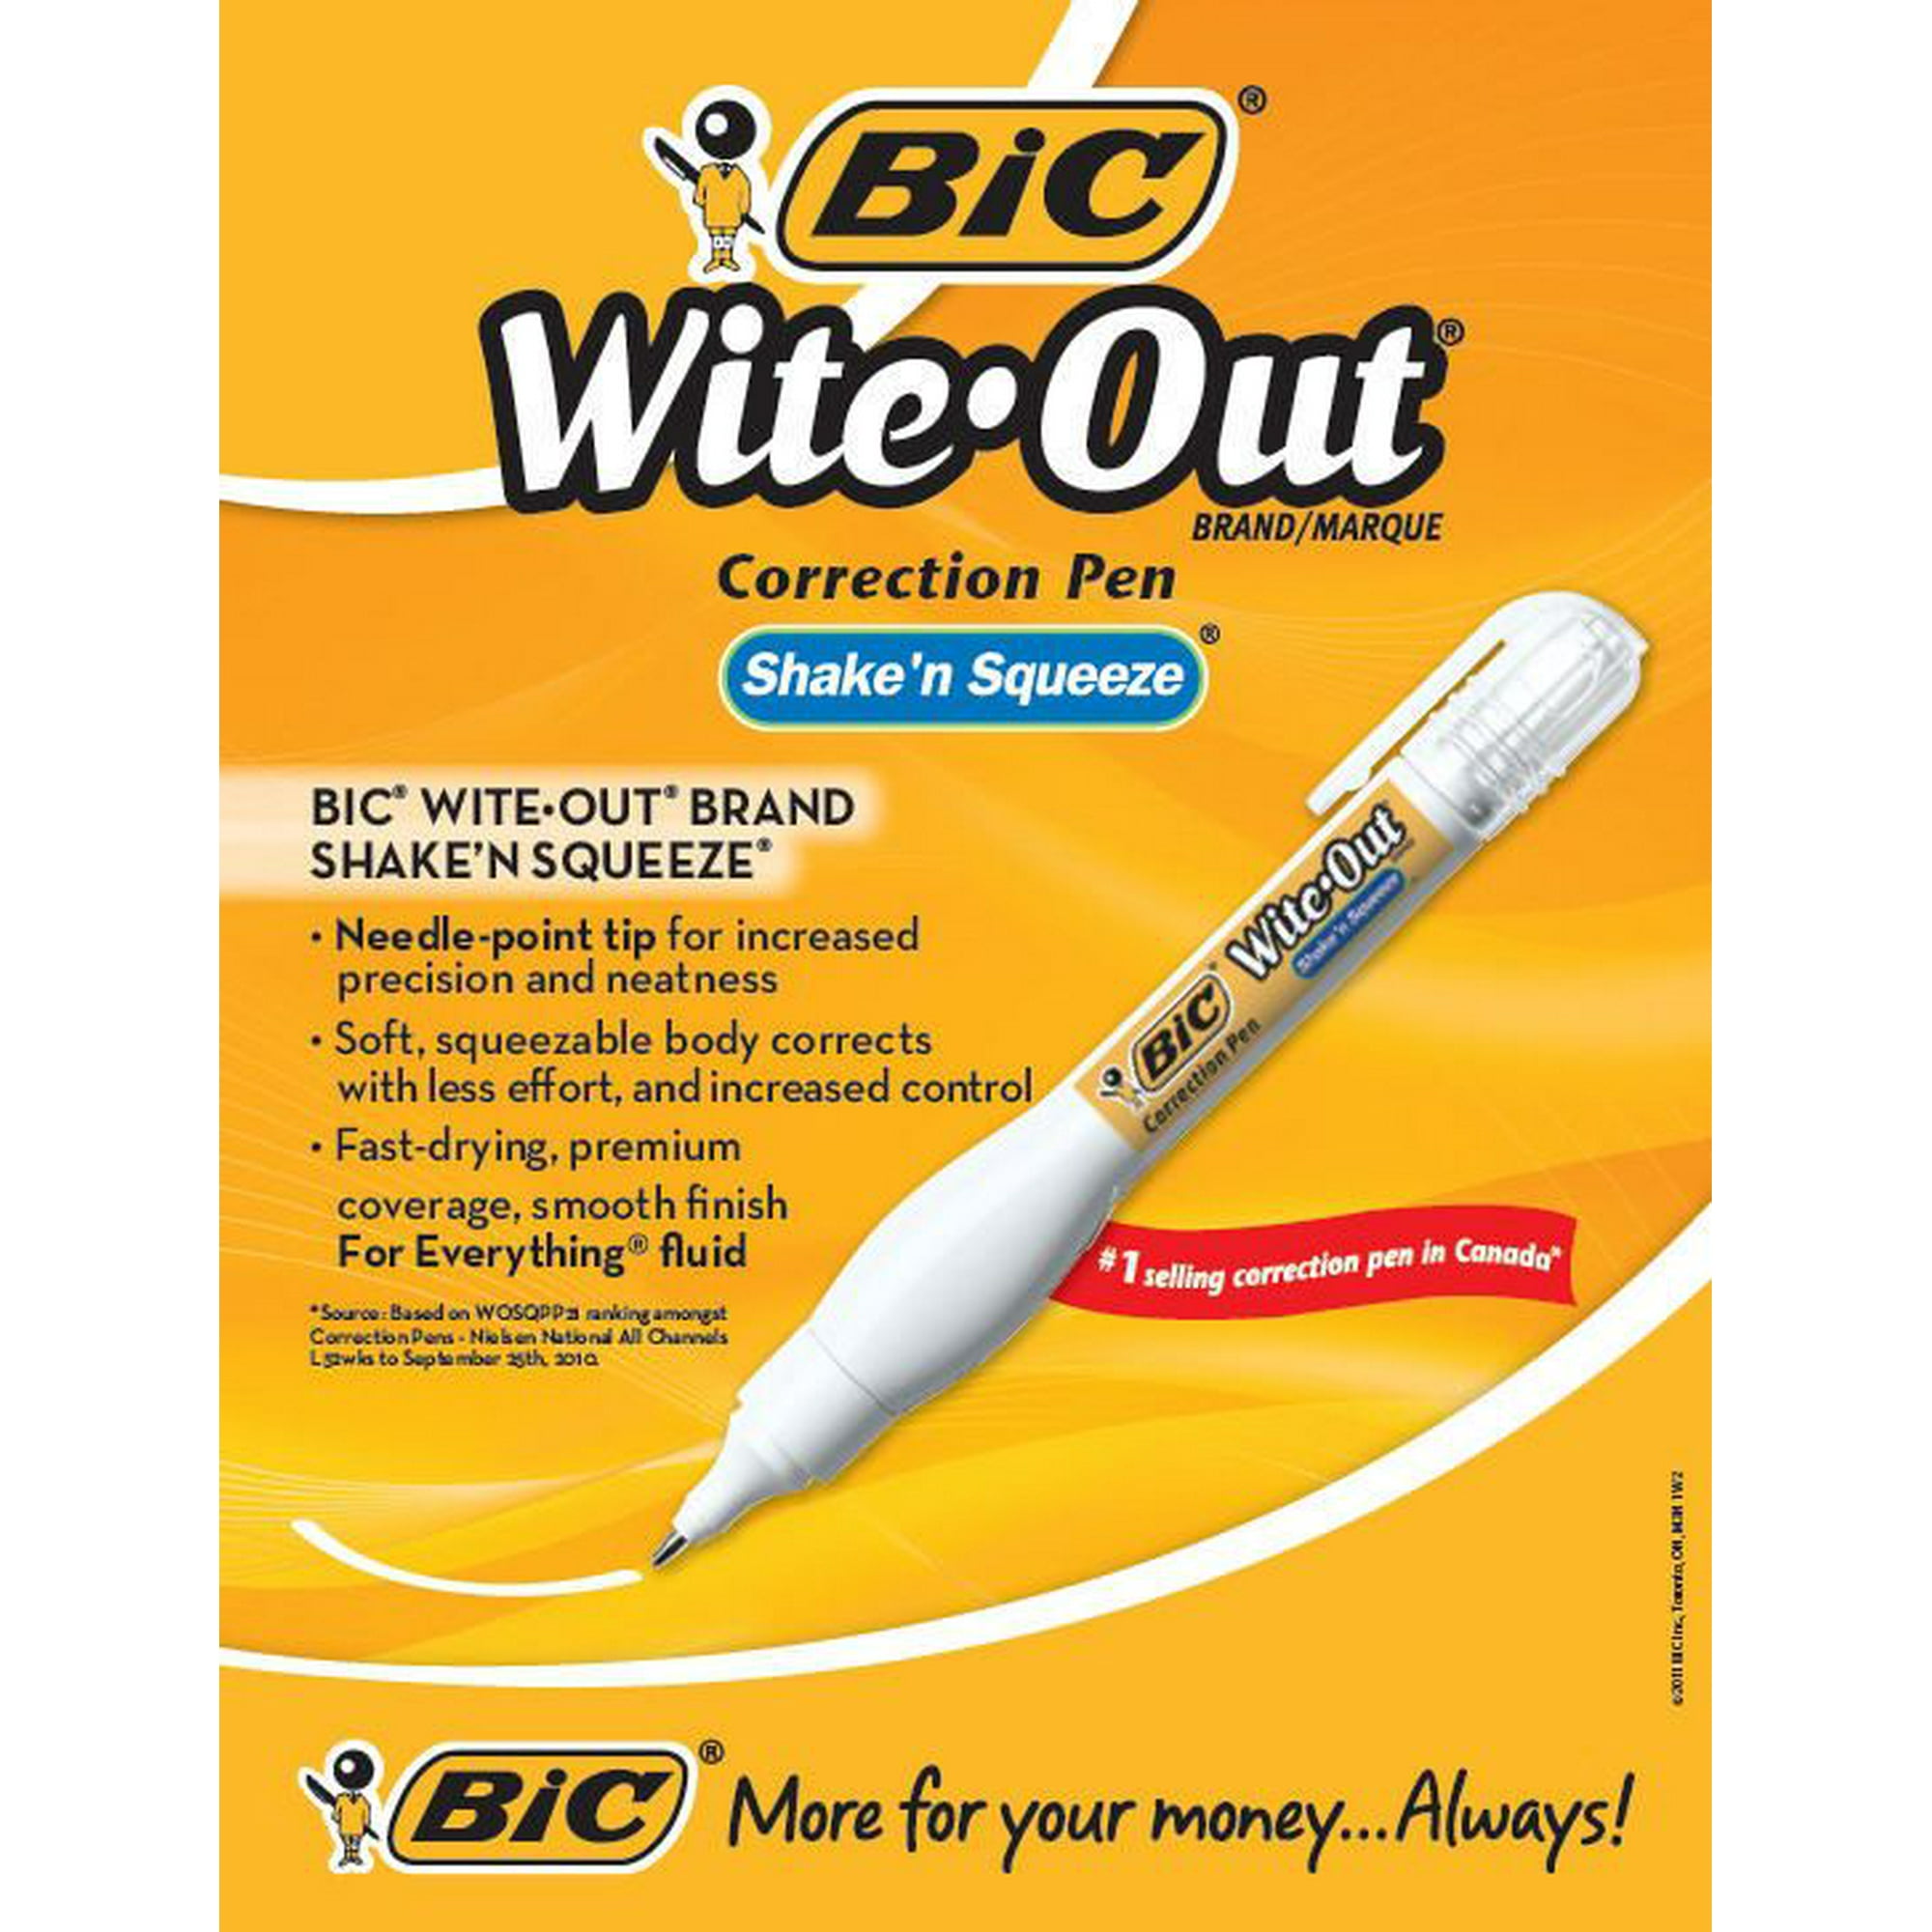 BESARME 12 Pieces White Out Tape Pen, Cute Whiteout Correction